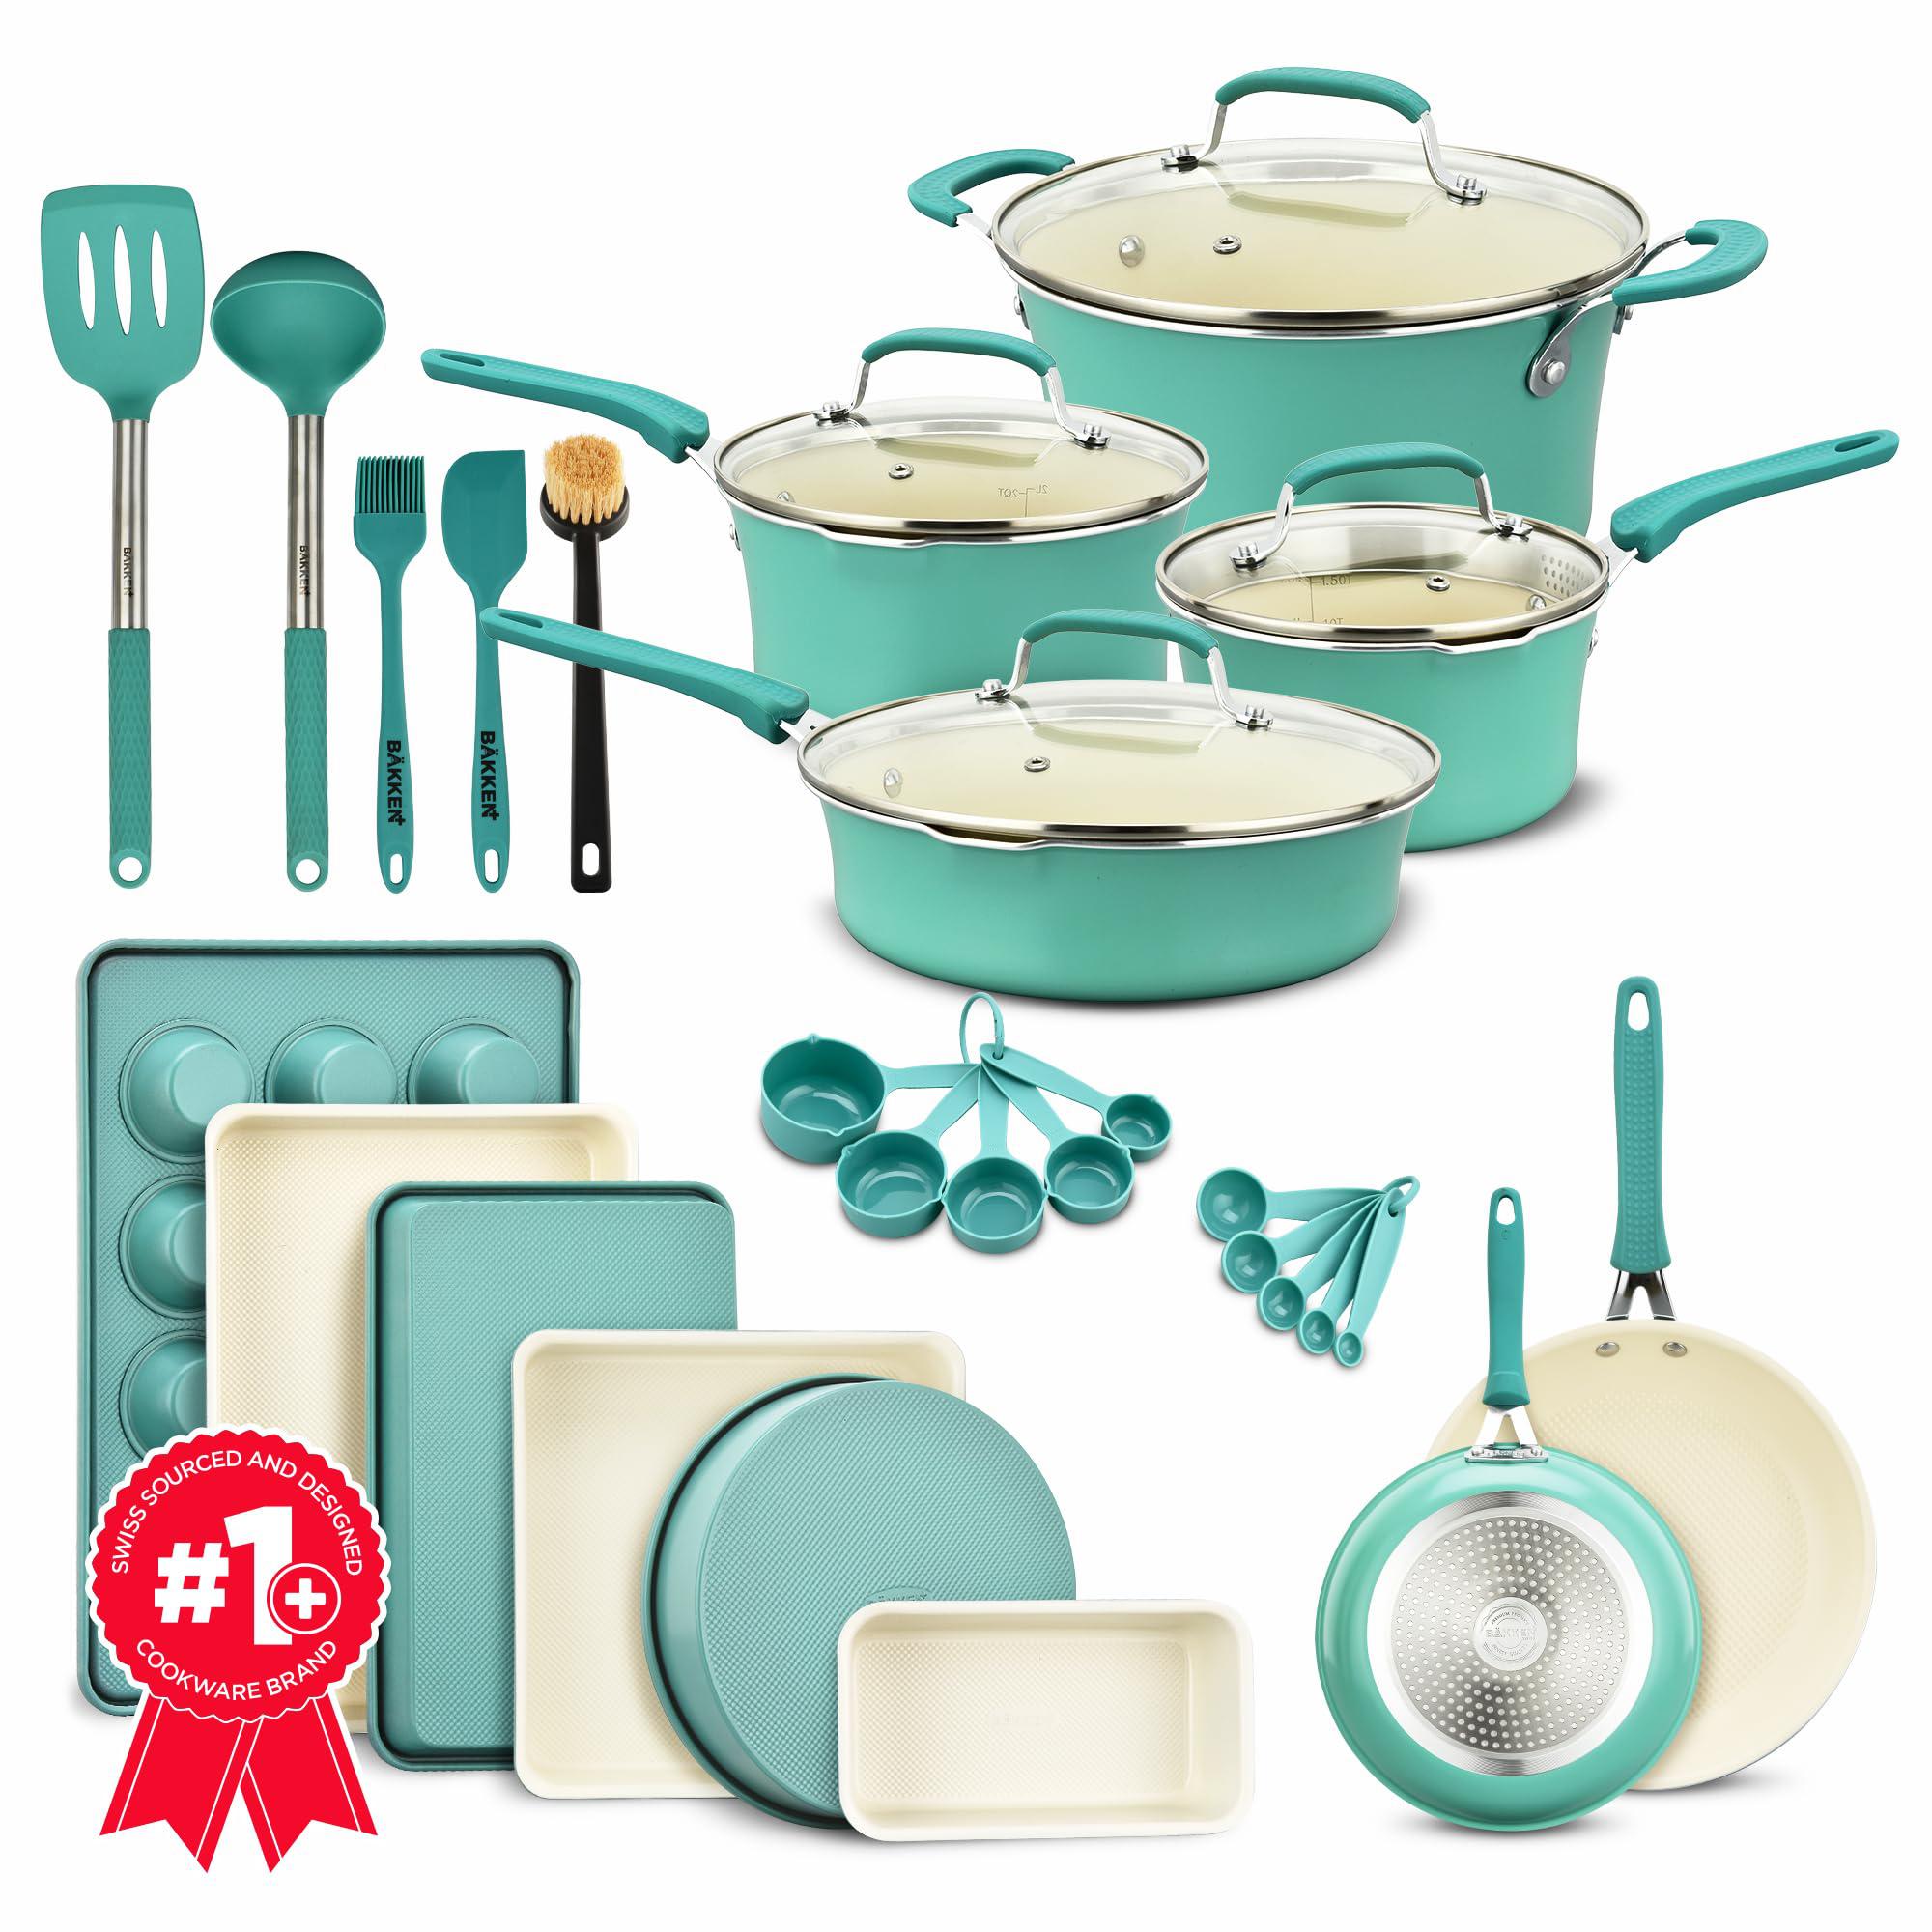 bakken- swiss cookware set - 23 piece -green multi-sized cooking pots with  lids, skillet fry pans and bakeware - reinforced pressed aluminu